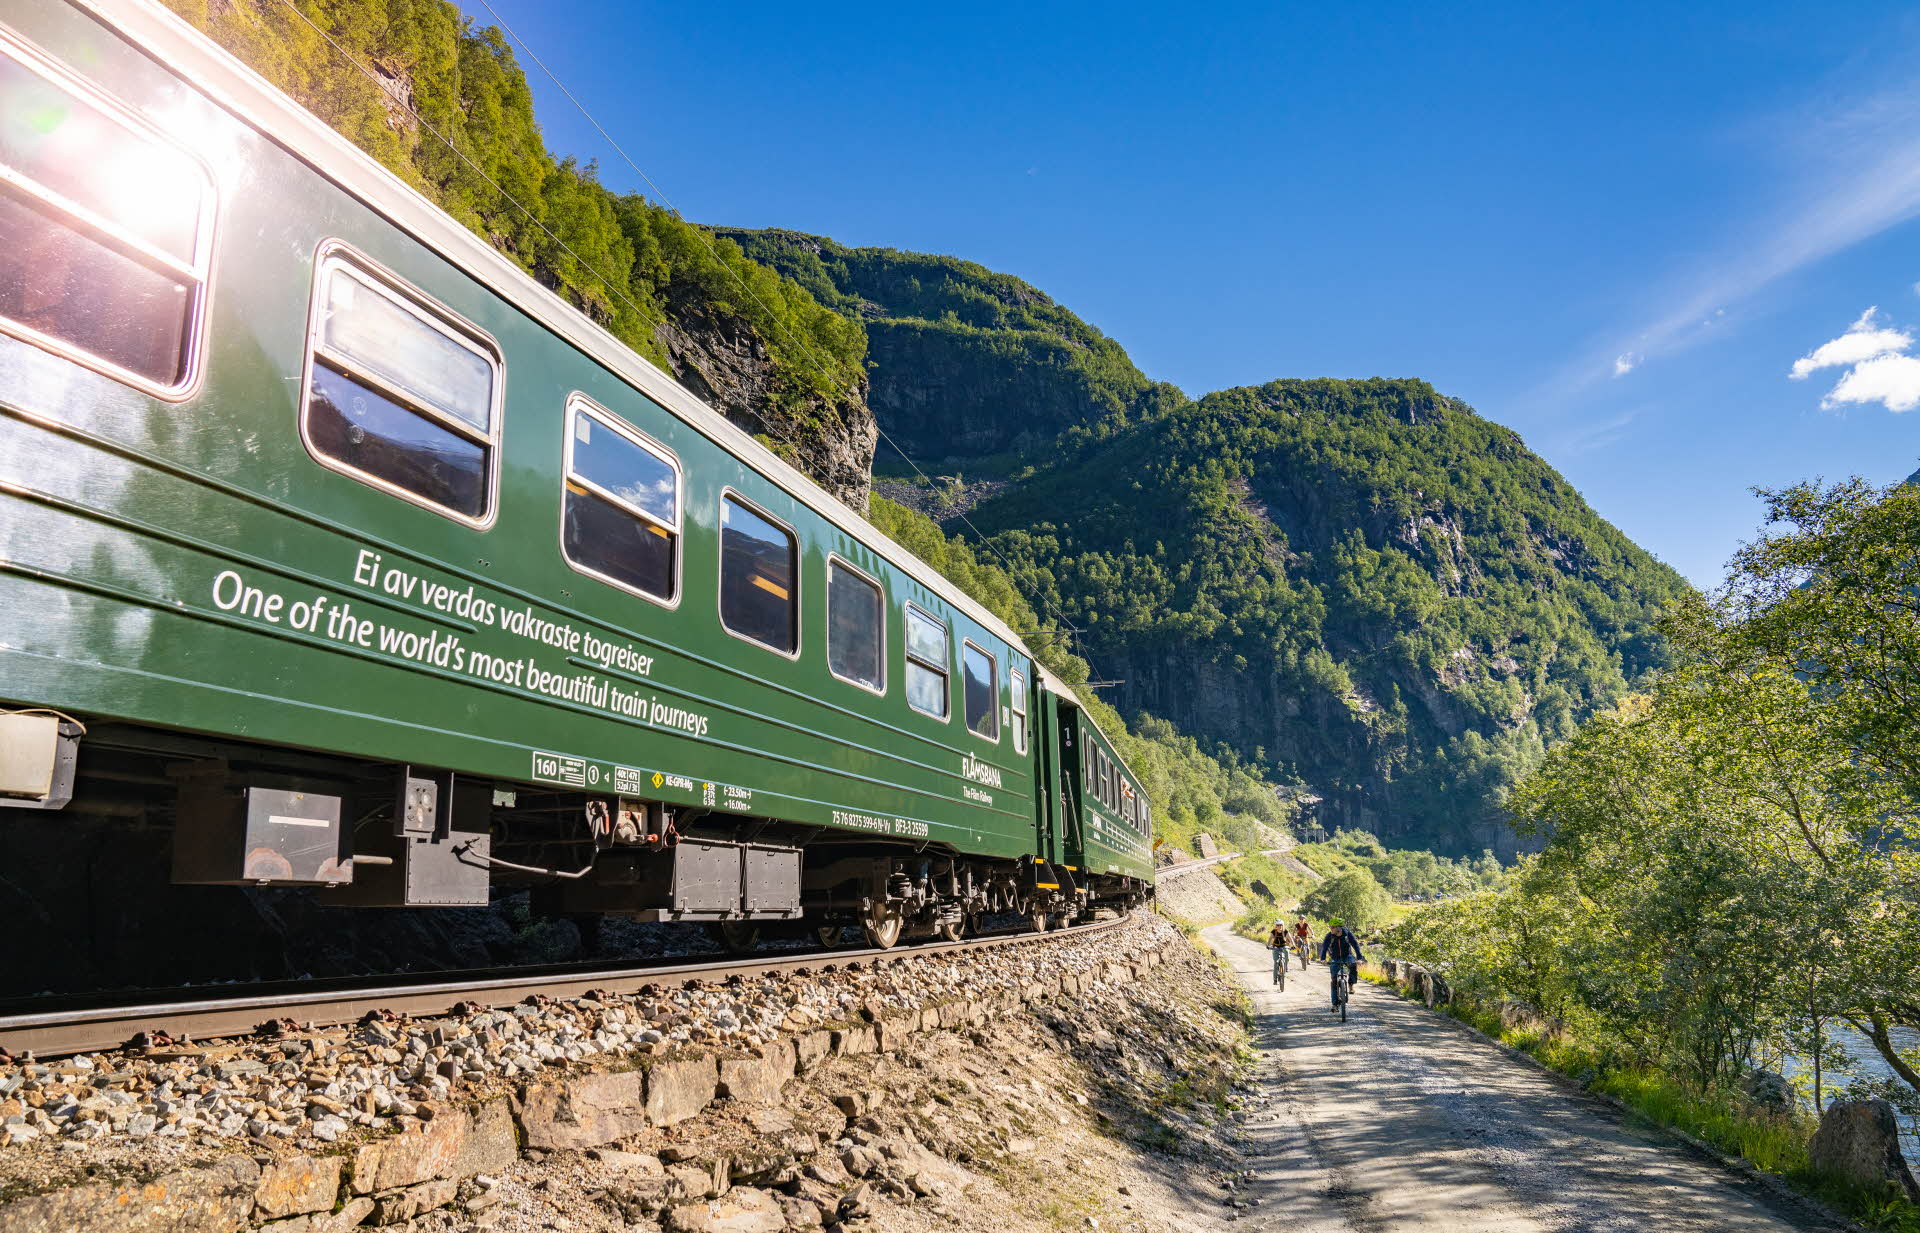 Cyclists on the Navvies’ road alongside the Flåm Railway and Flåm river. Blue sky and forest covered mountains.